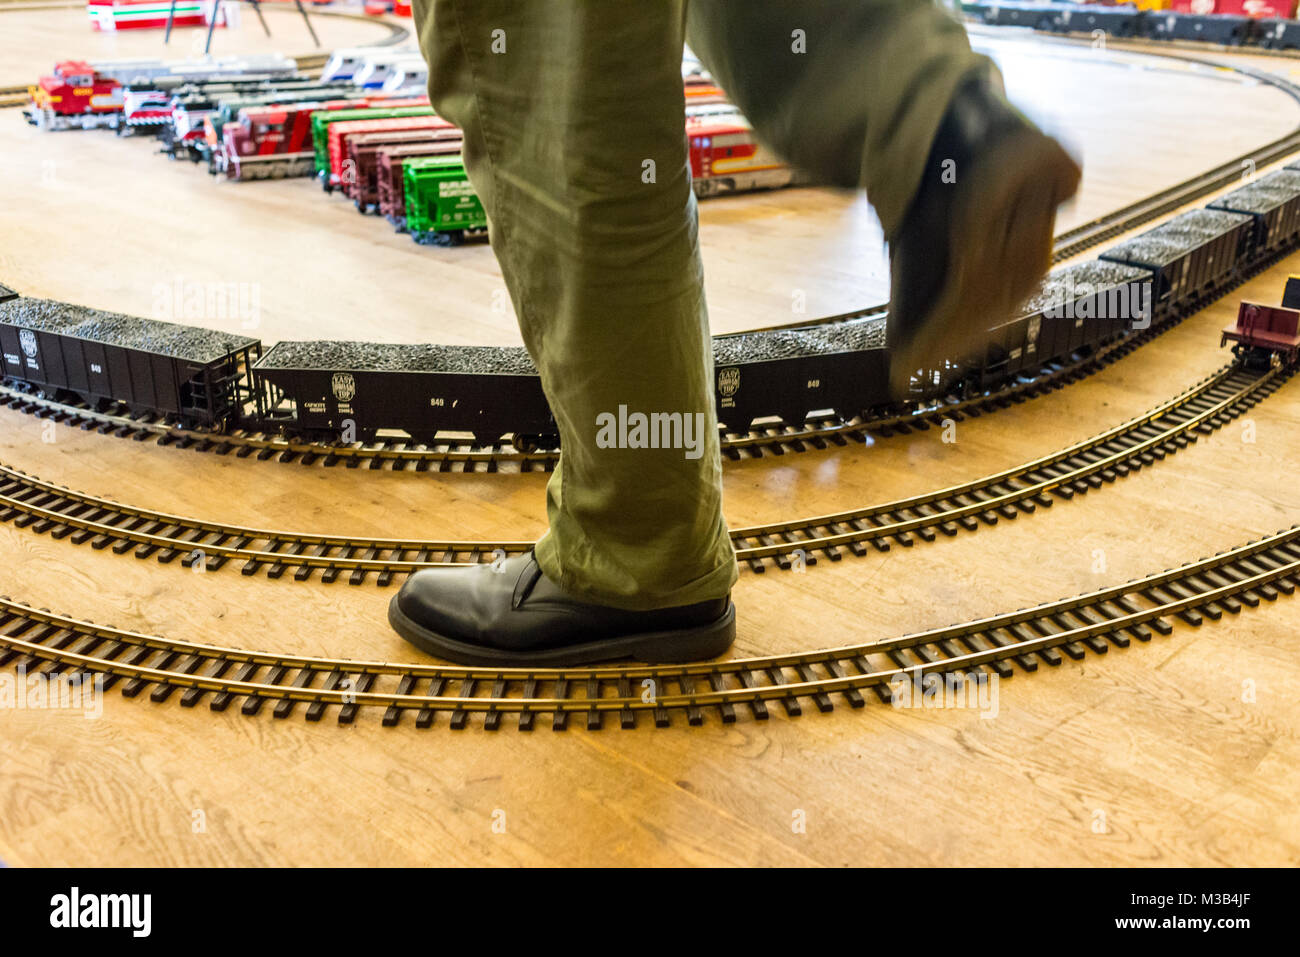 Man's foot wearing a boot stepping over a super sized train set exhibition. Stock Photo